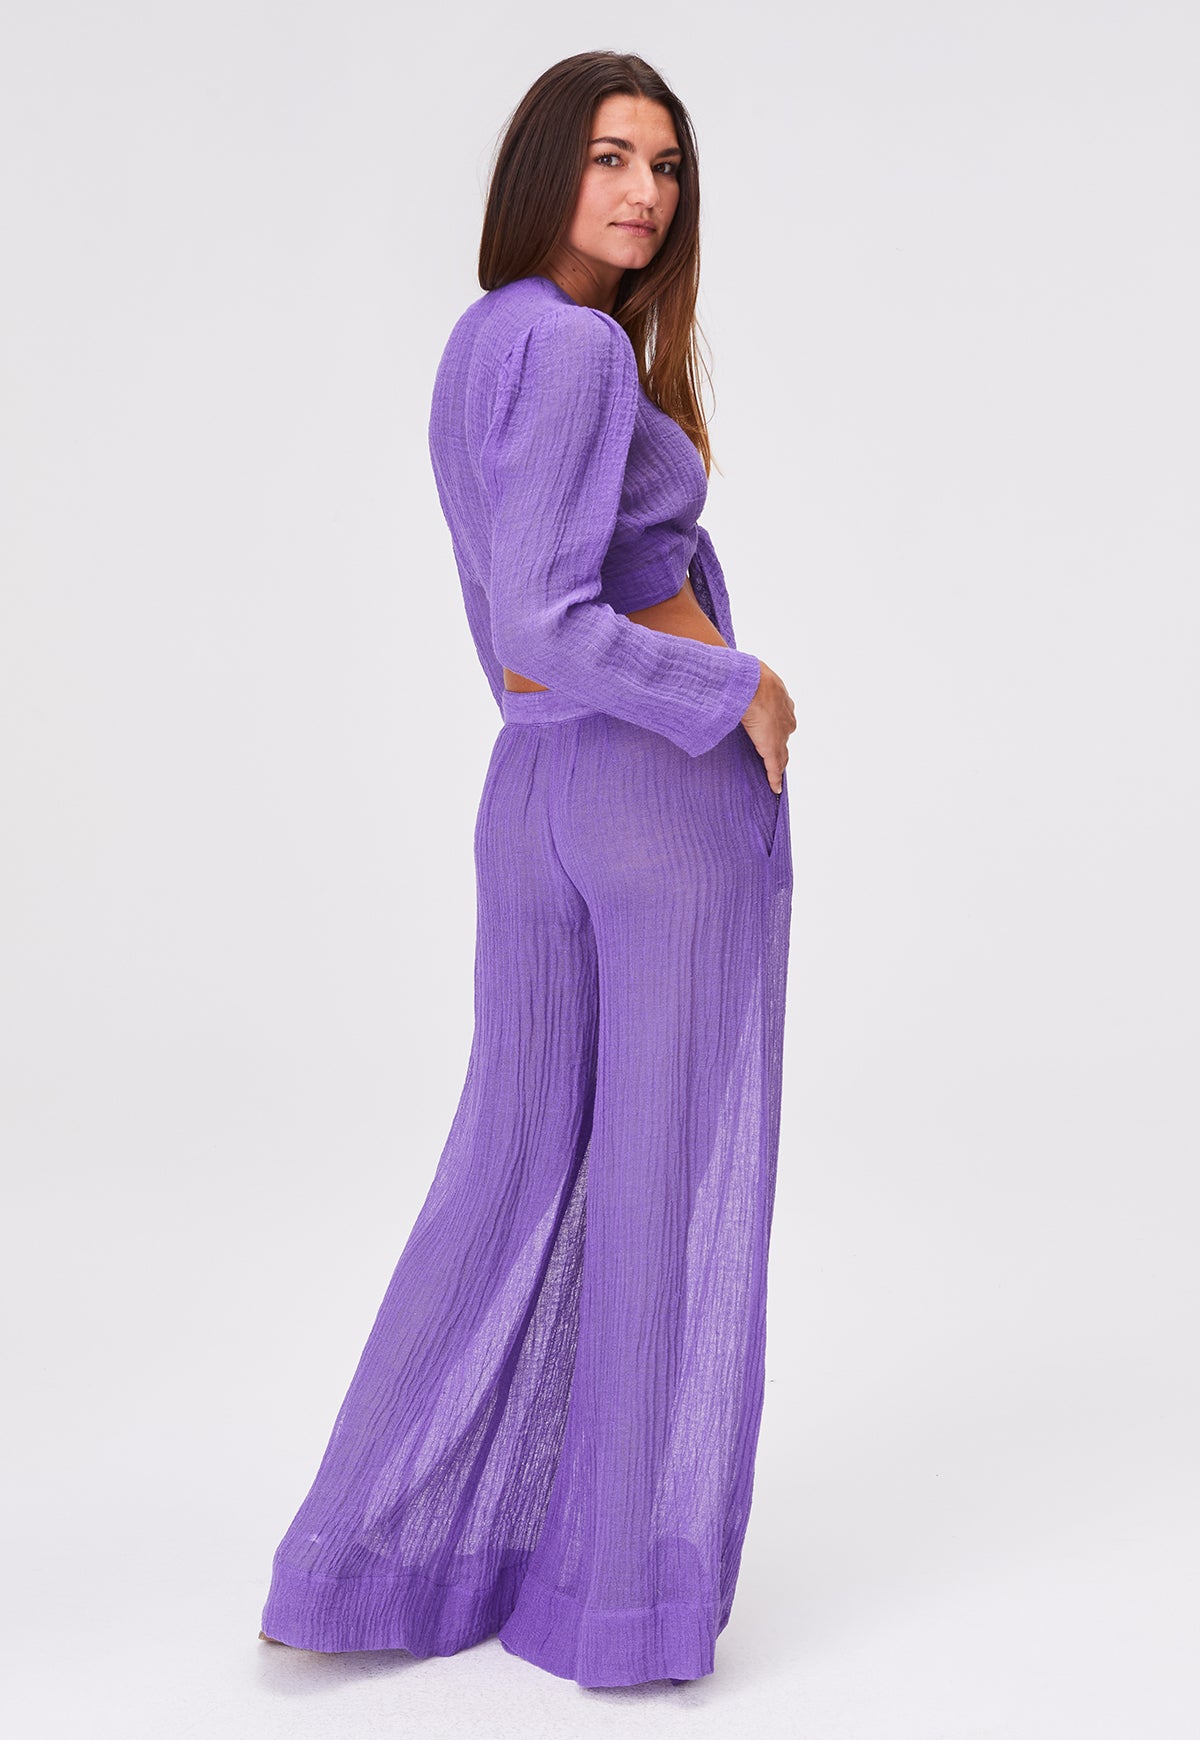 THE LOW-WAIST WIDE LEG PANT in LAVENDER SORRENTO GAUZE